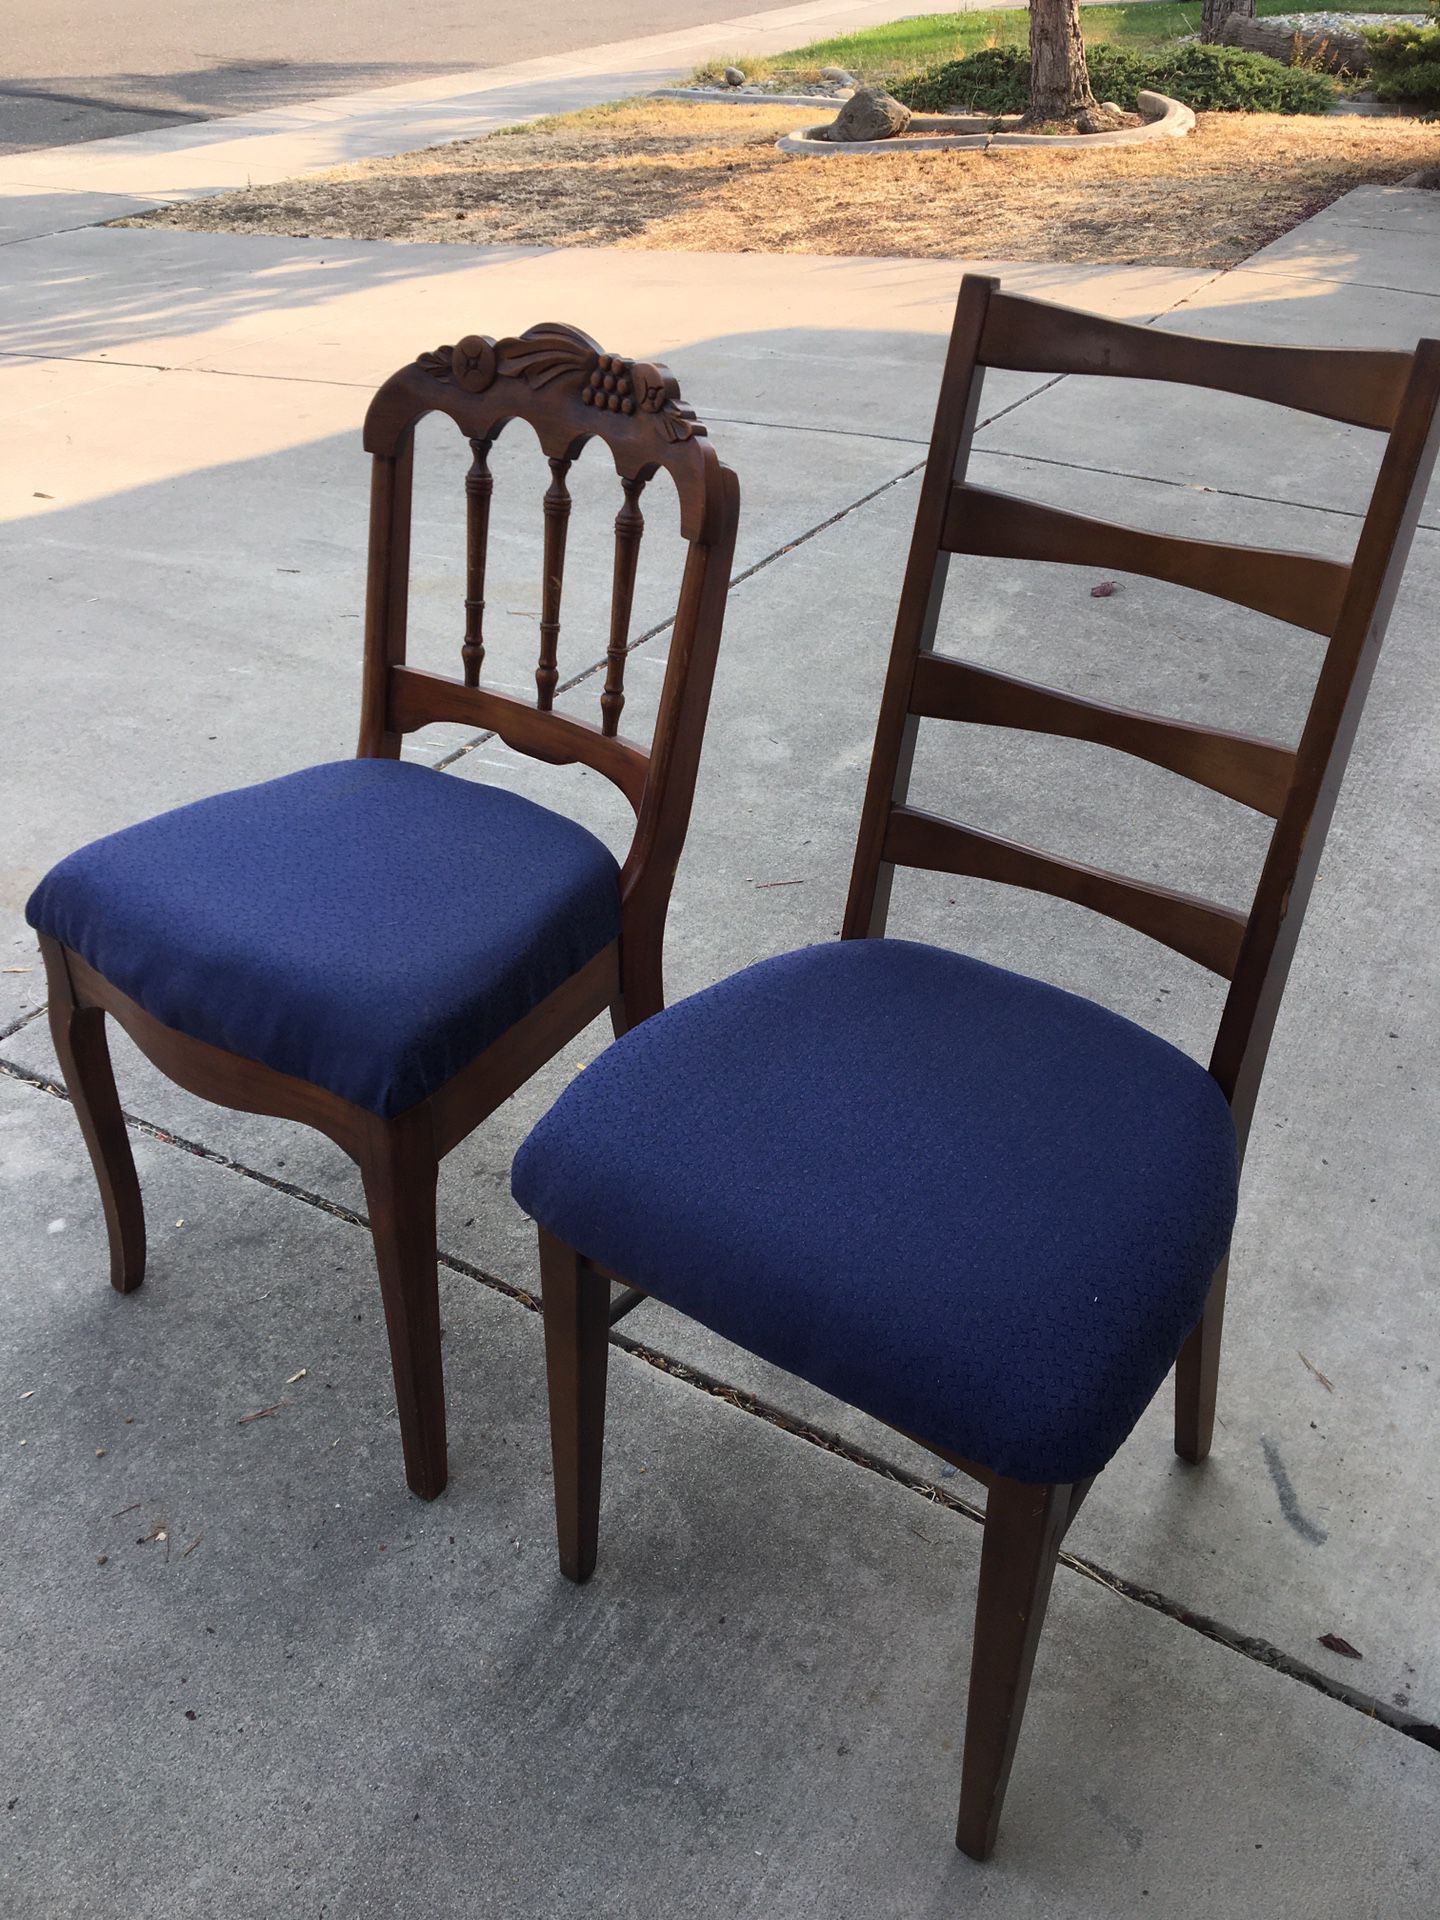 Two wood chairs with padded seats